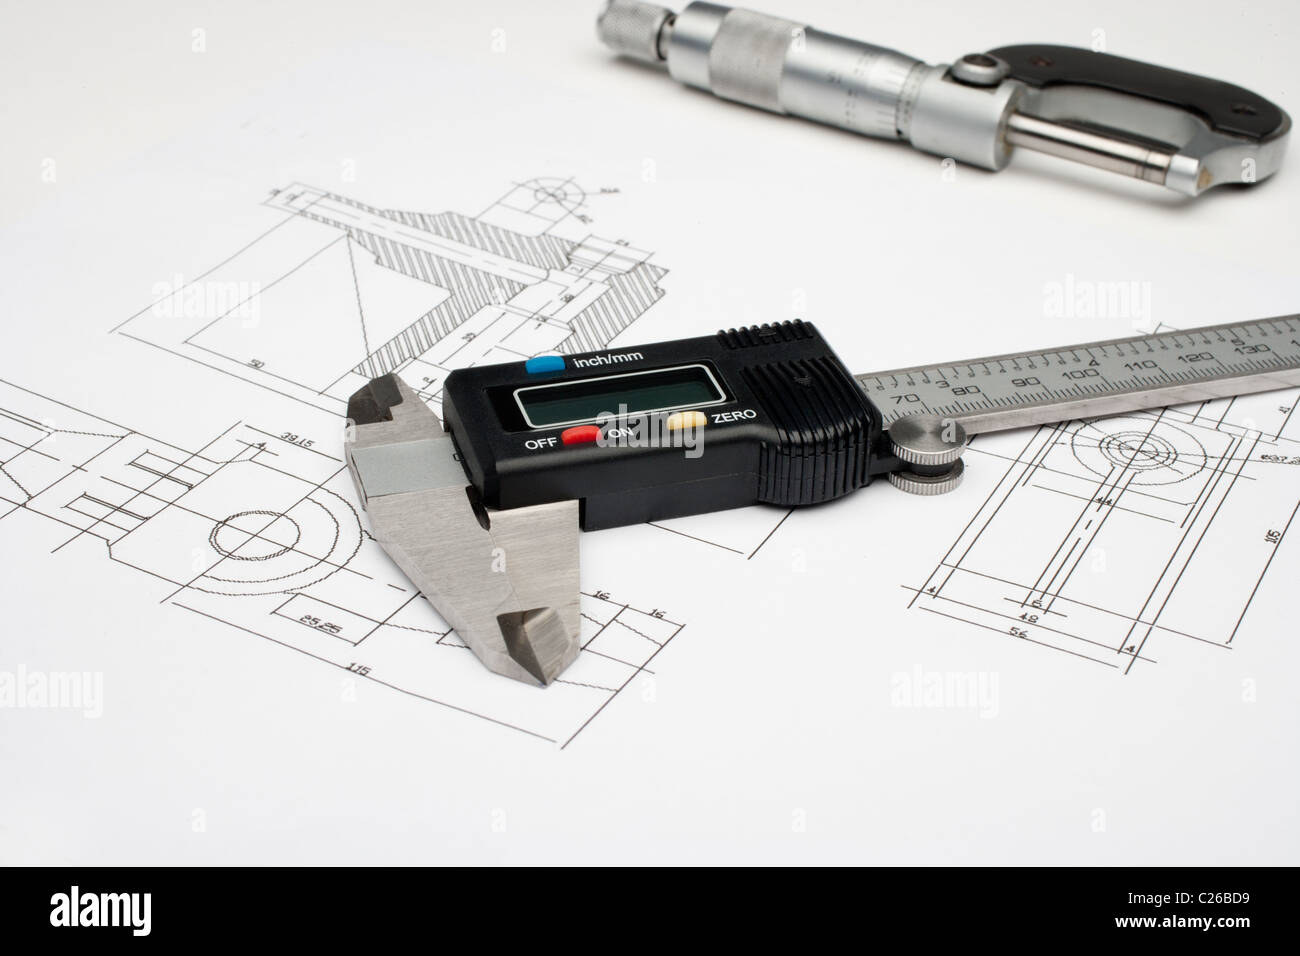 Horizontal image of a micrometer and digital caliper on a white drawing Stock Photo